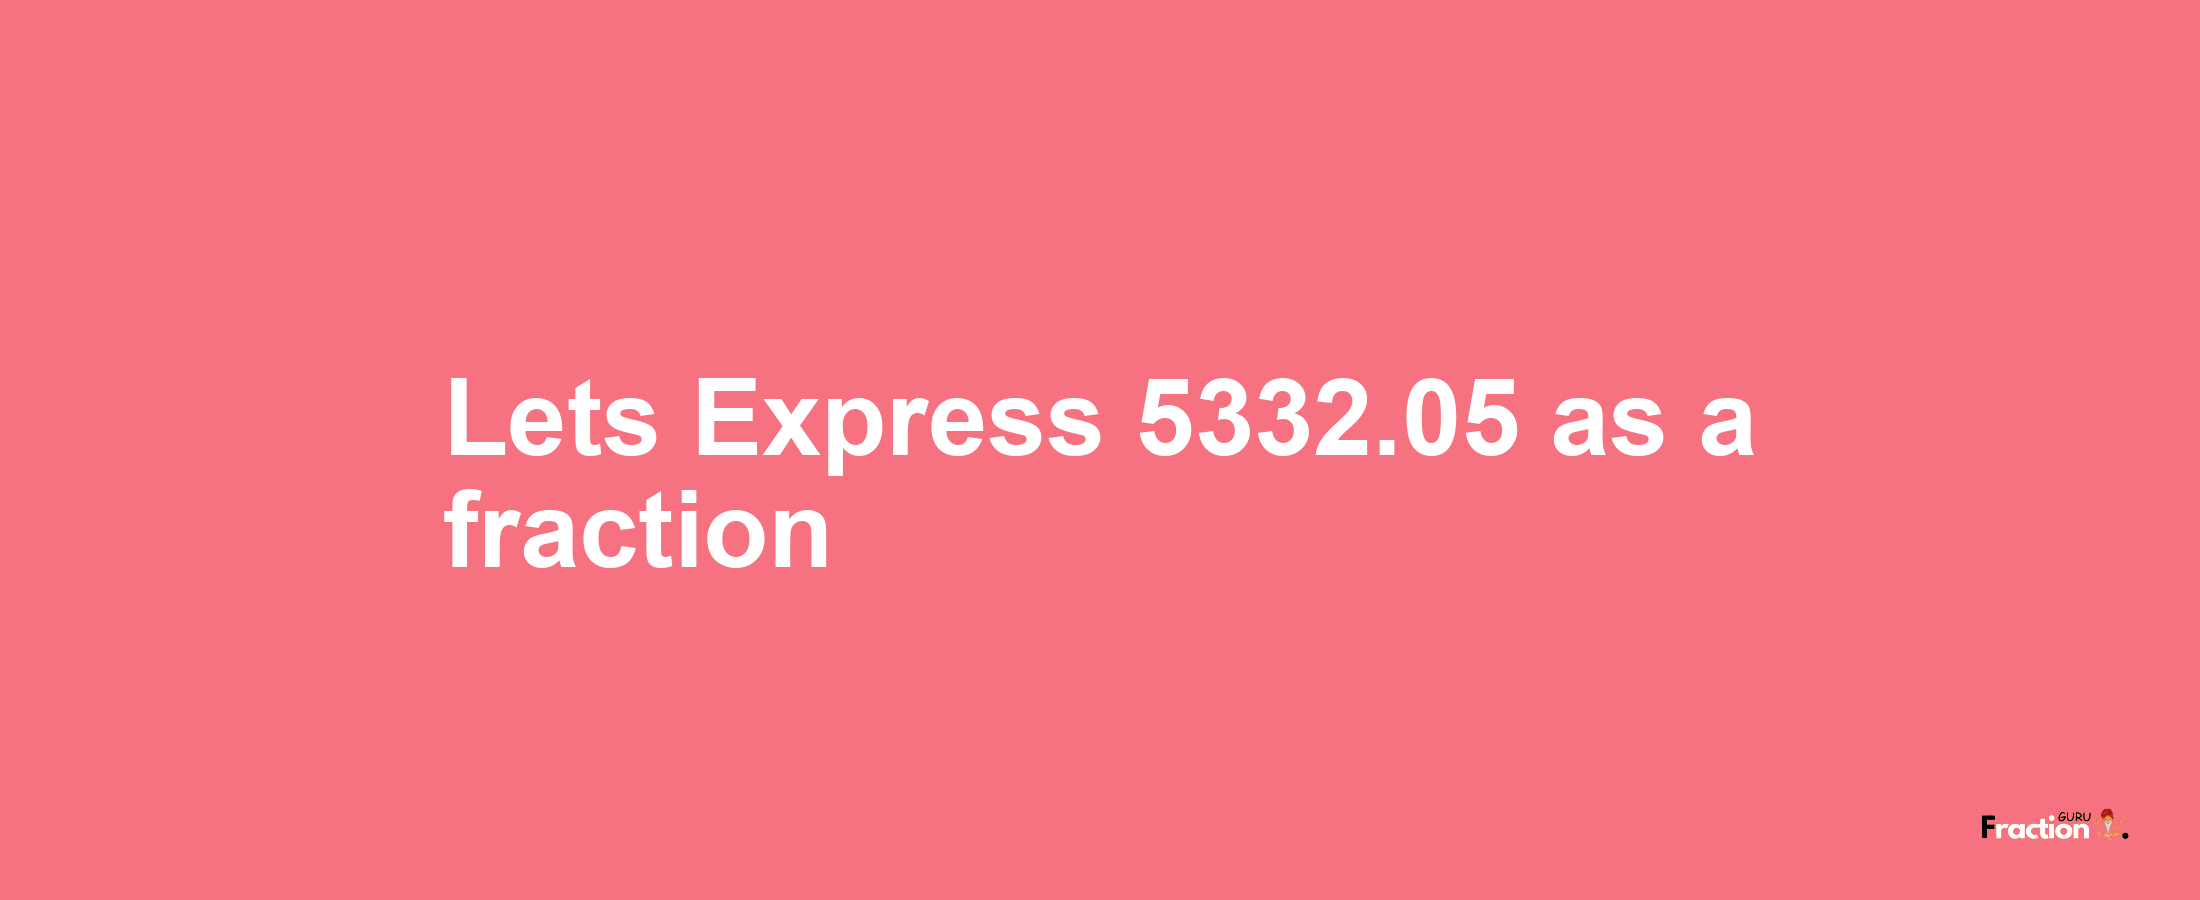 Lets Express 5332.05 as afraction